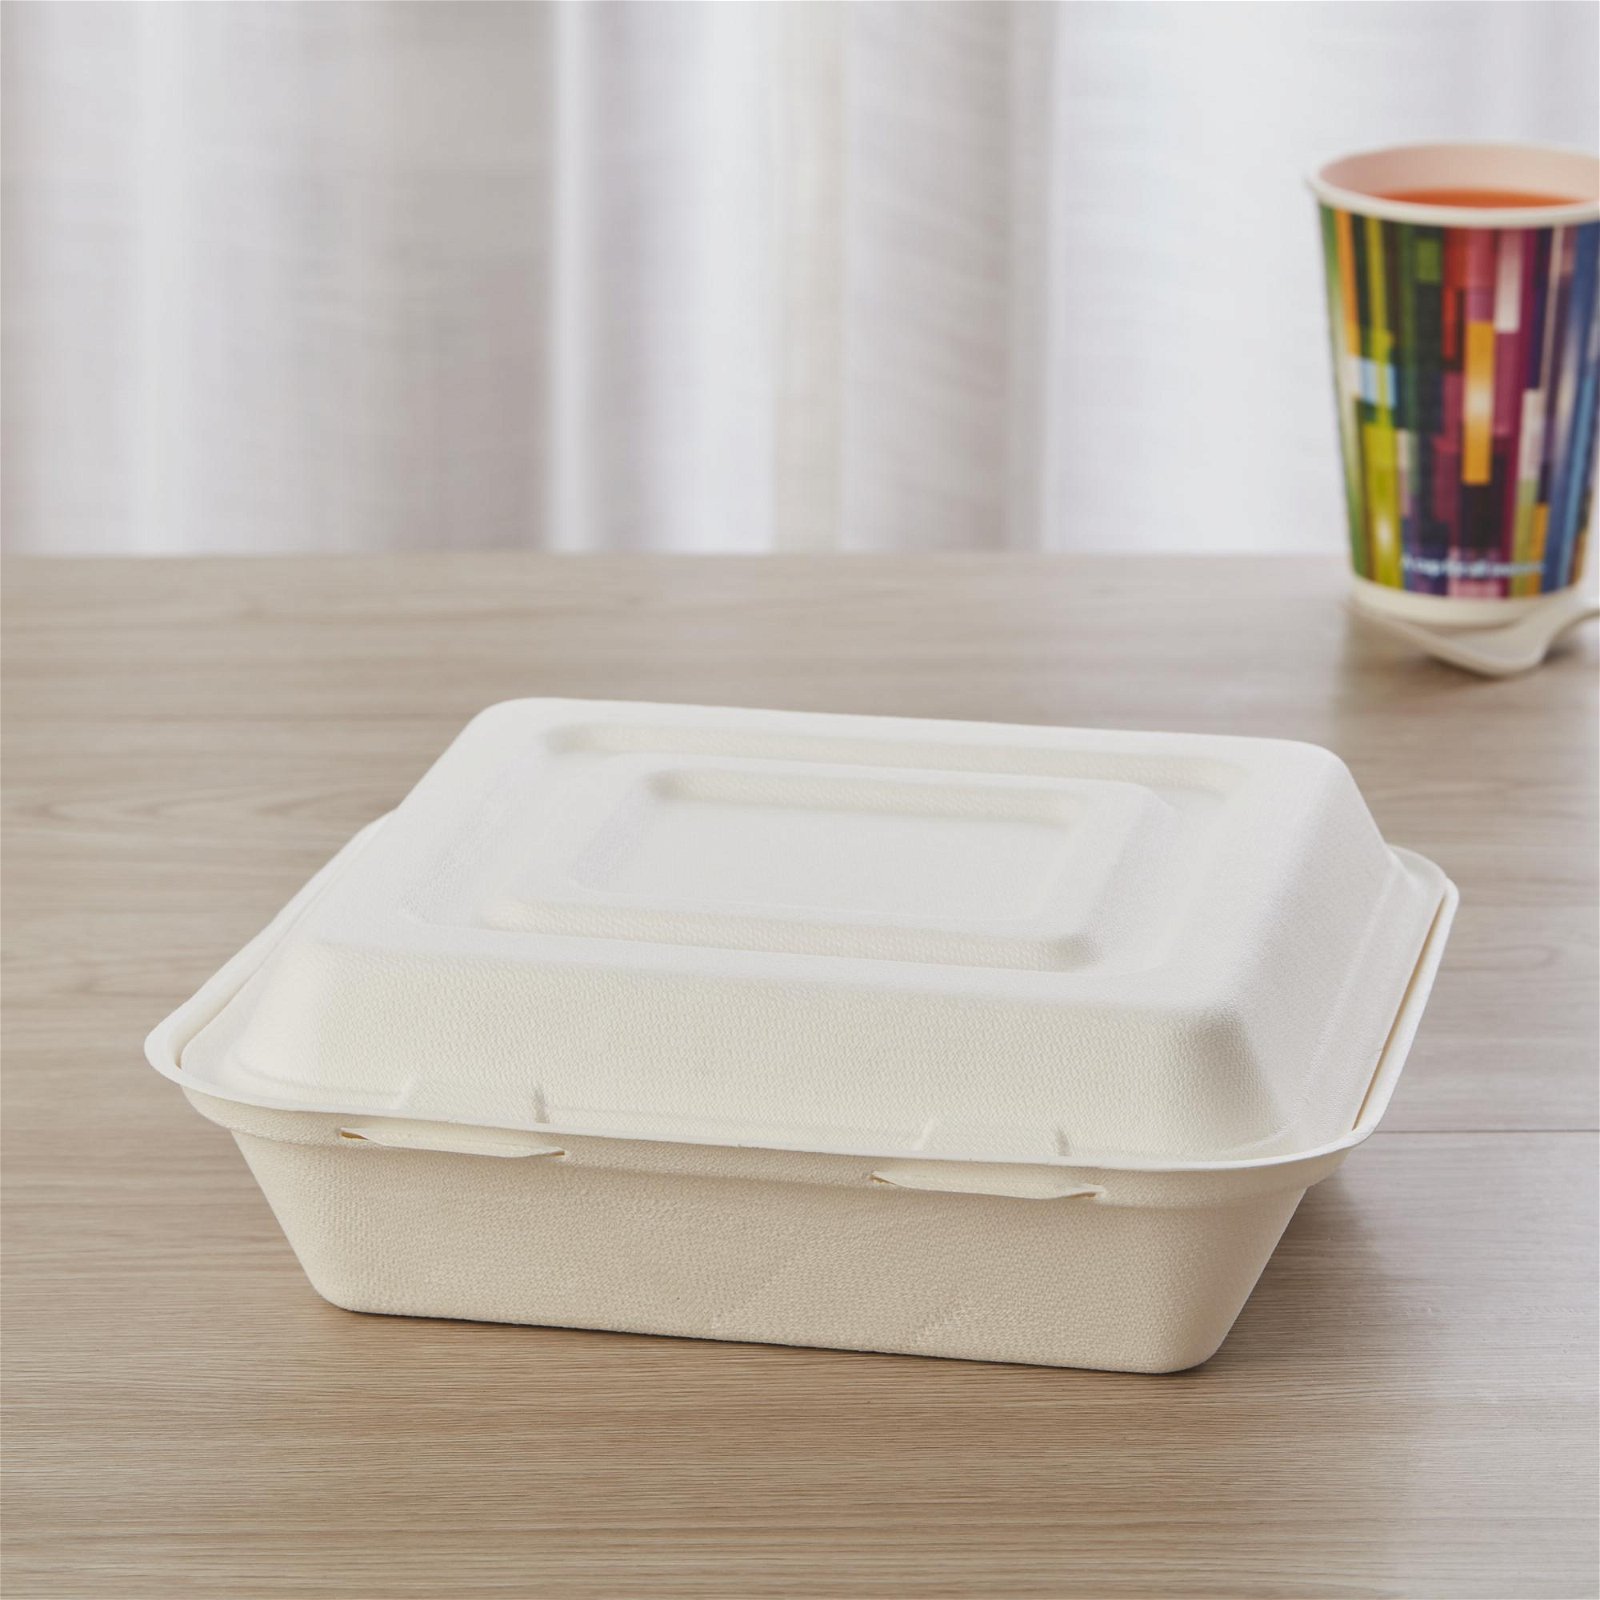 3 Compartment Takeaway Food Compartment Container Biodegradable 2